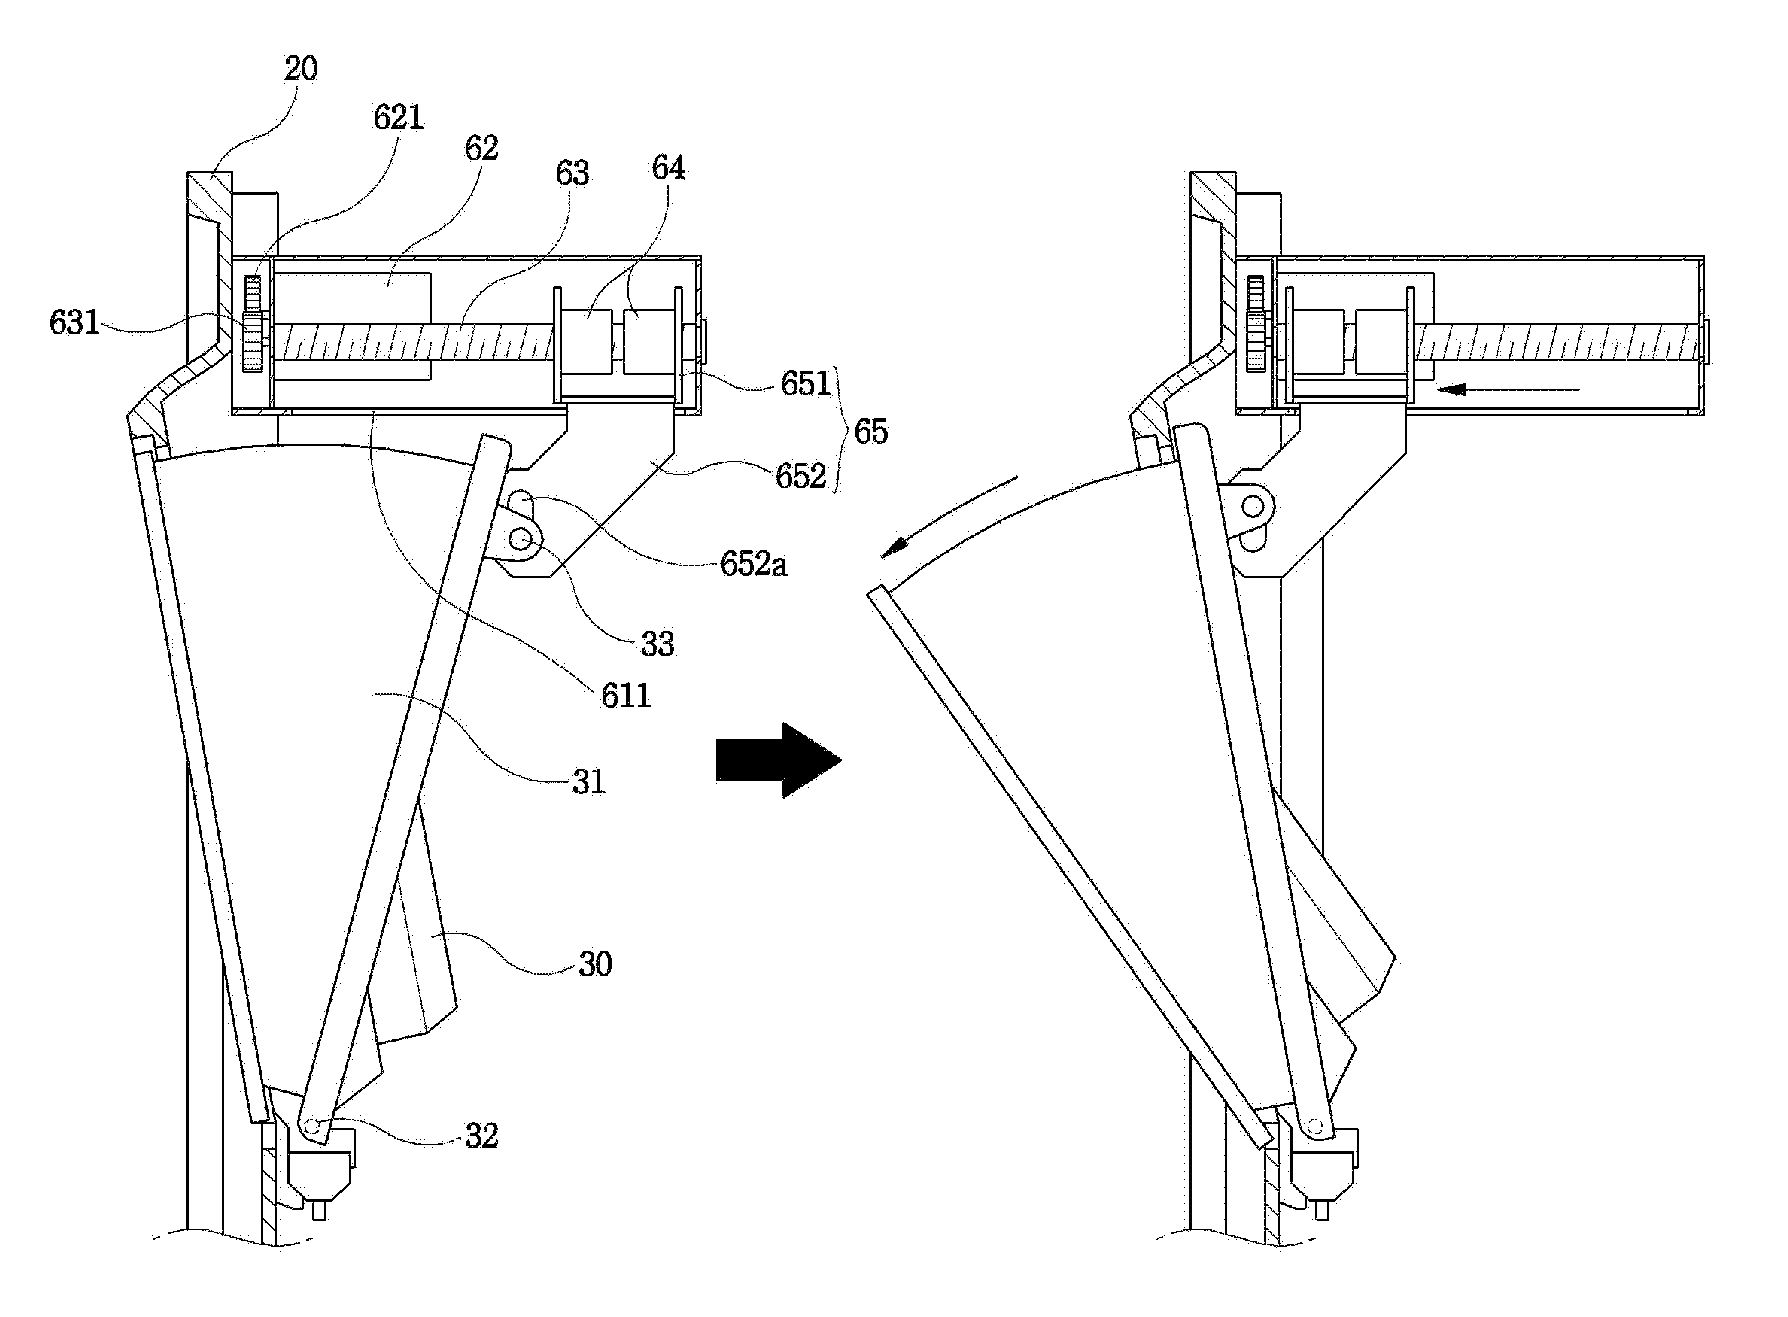 Automatic teller machine (ATM) for vehicle driver